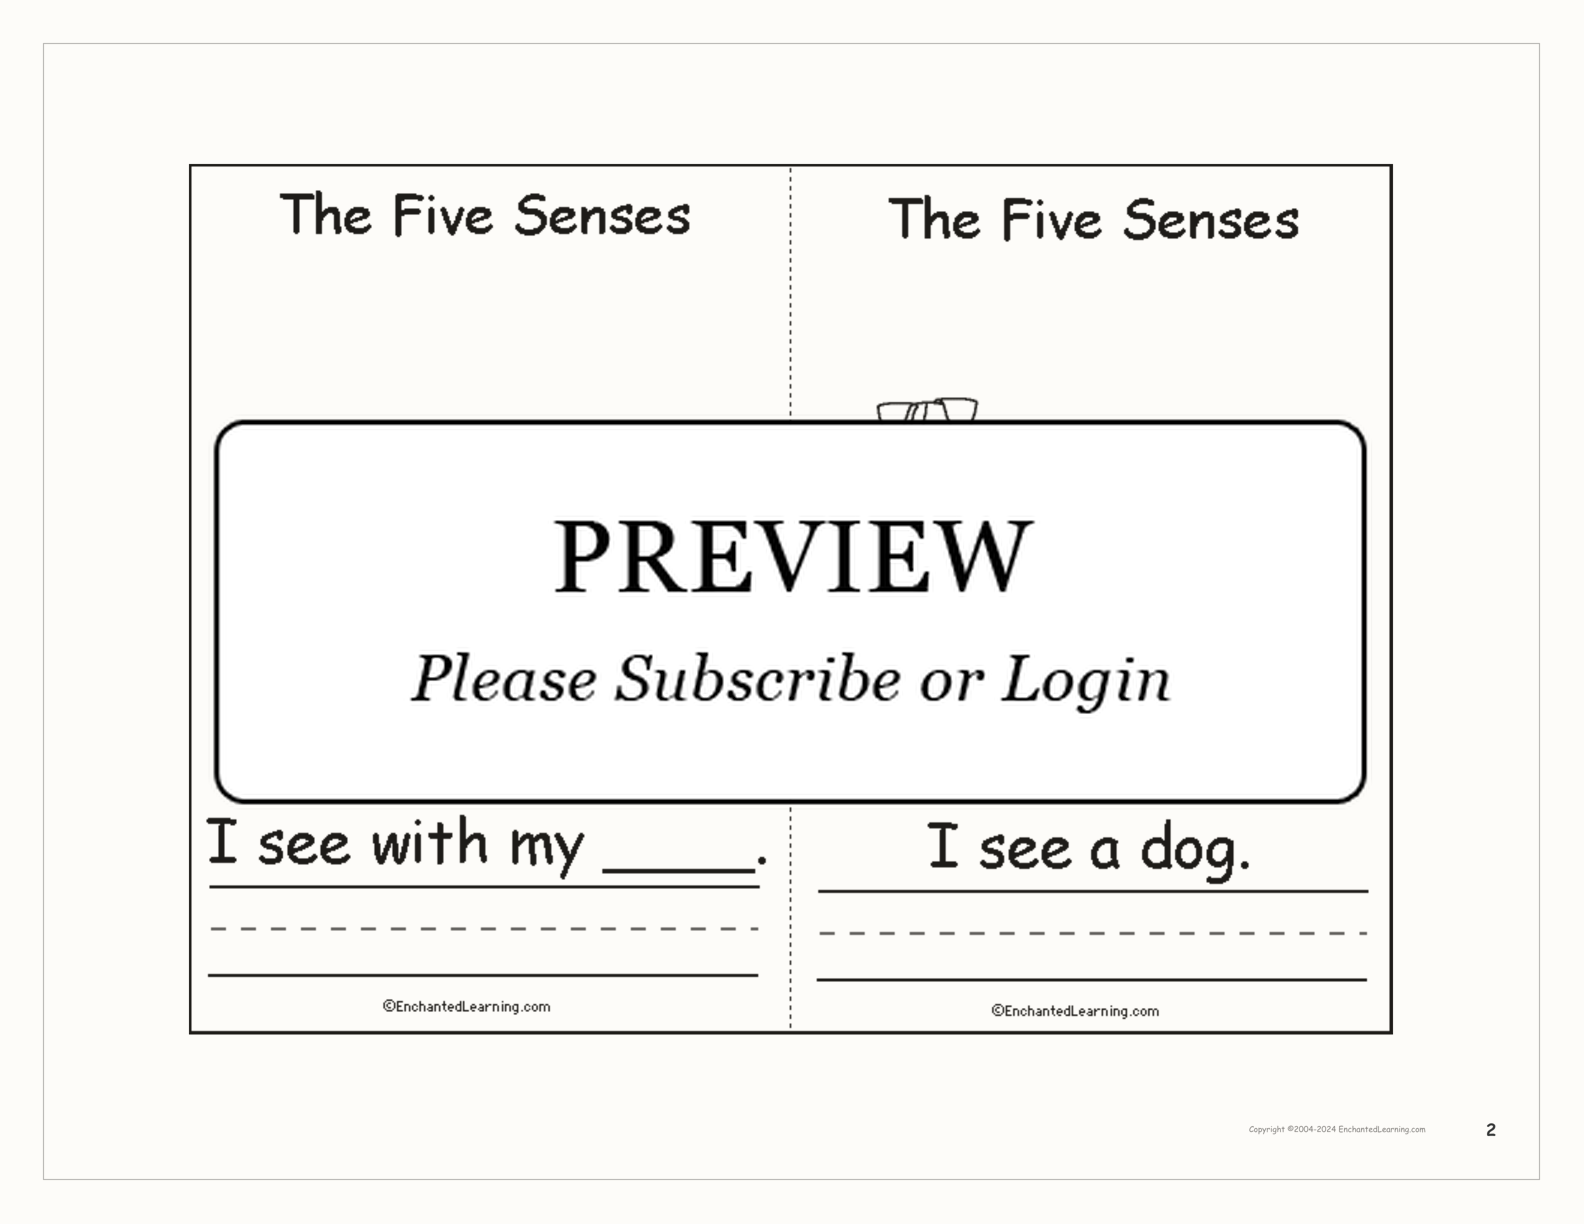 The Five Senses - Printable Book interactive worksheet page 2